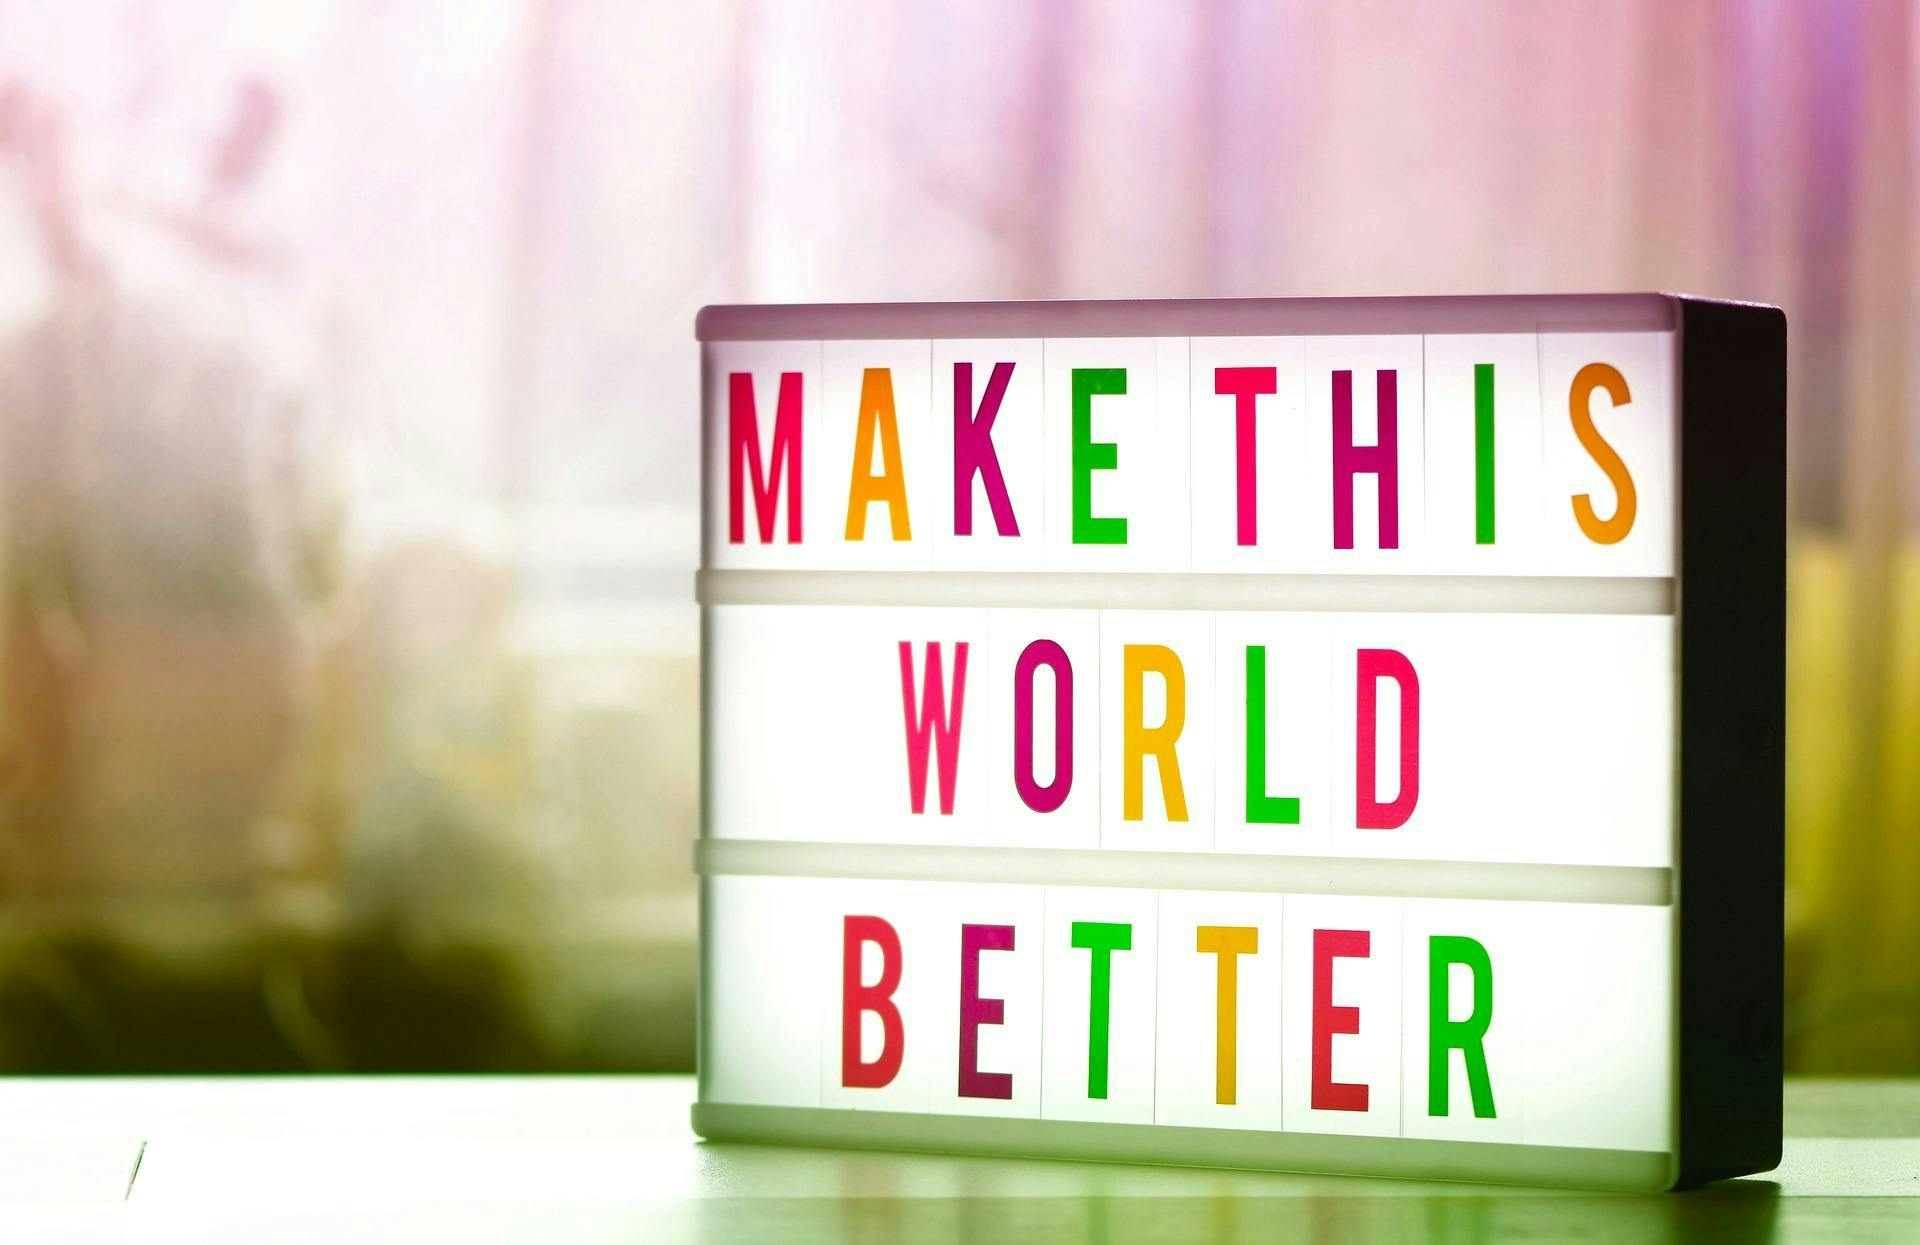 Lightbox sign displaying "MAKE THIS WORLD BETTER" in colorful letters, sitting on a table with a blurred light, warm-toned background.